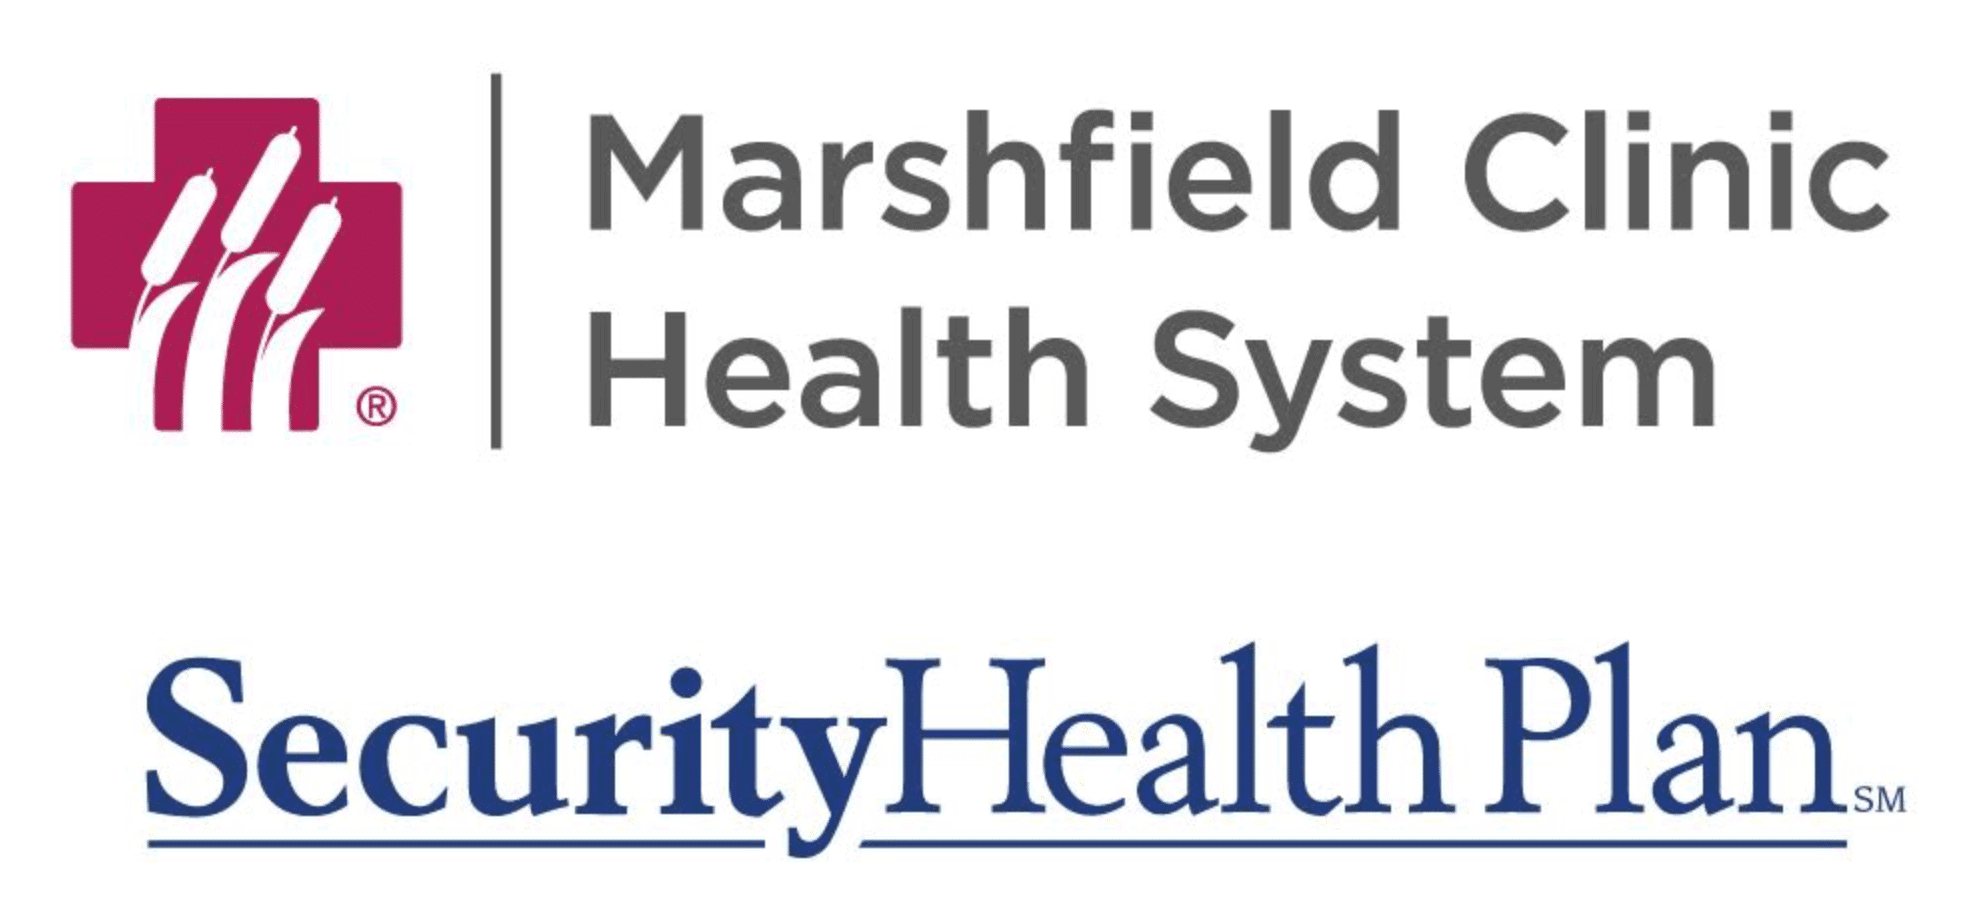 Logos for Marshfield Clinic Health System and Security Health Plan.